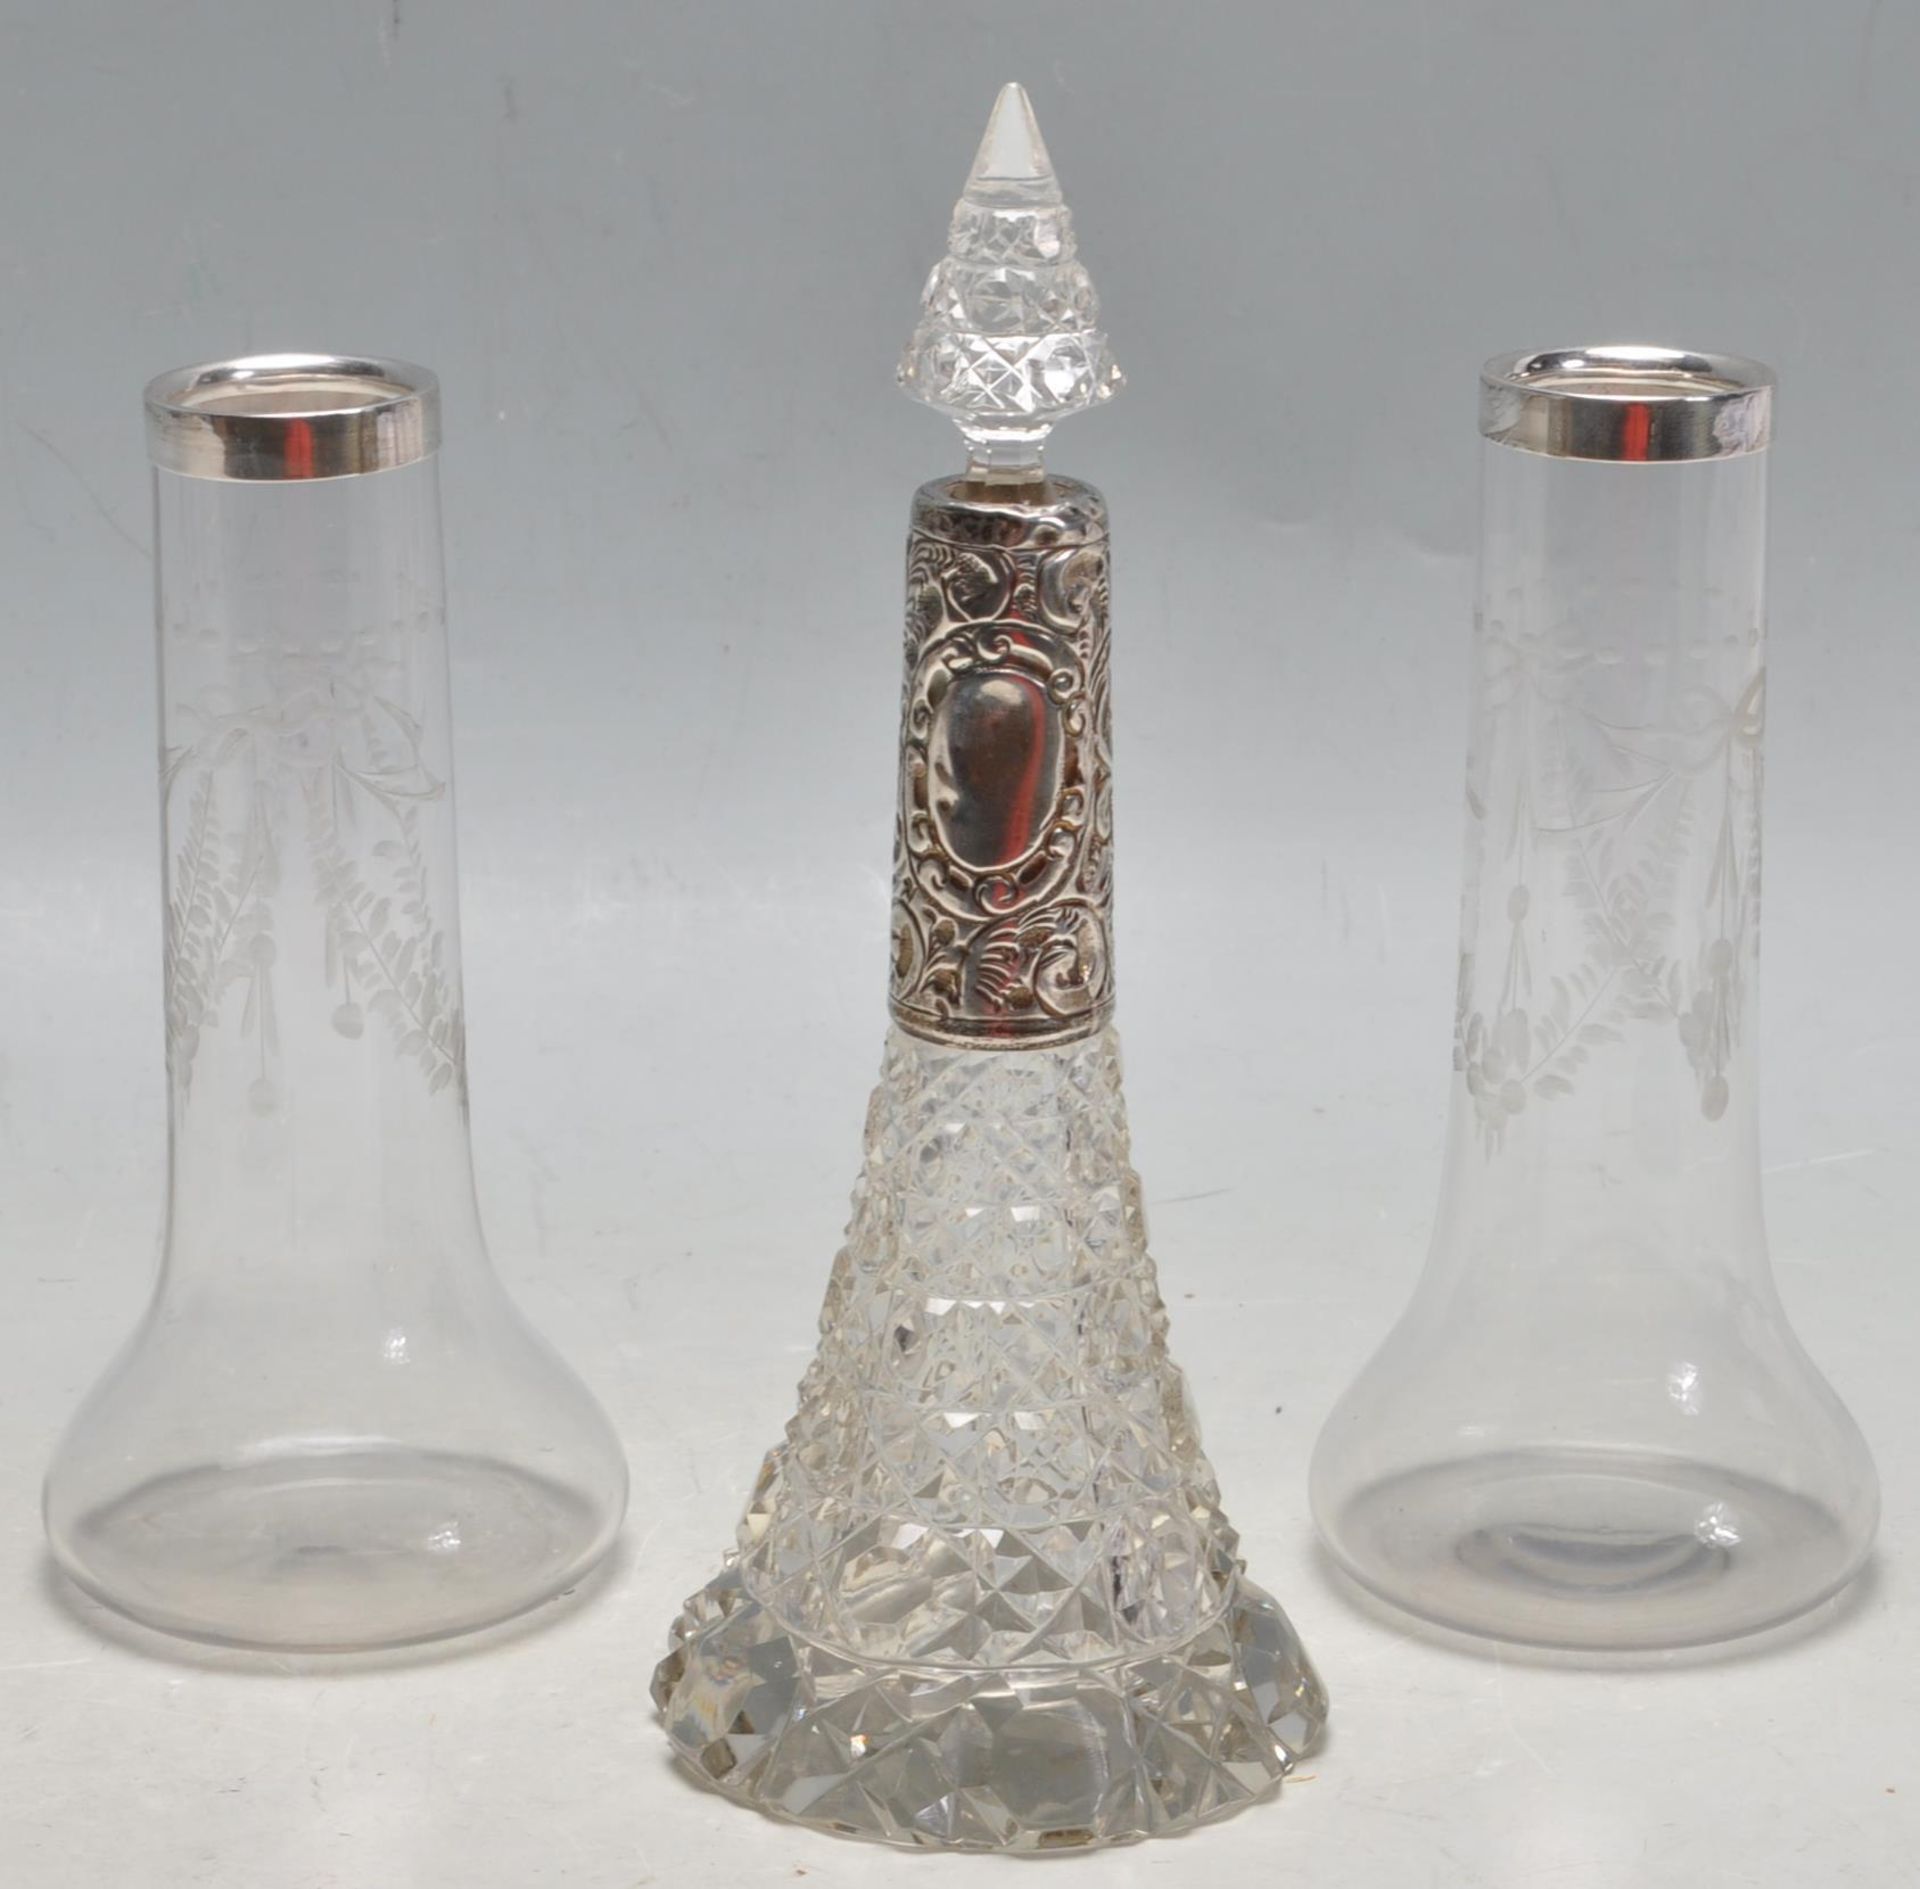 1905 EDWARDIAN SILVER AND CUT GLASS PERFUME BOTTLE ALONG WITH A PAIR OF GLASS AND SILVER VASES